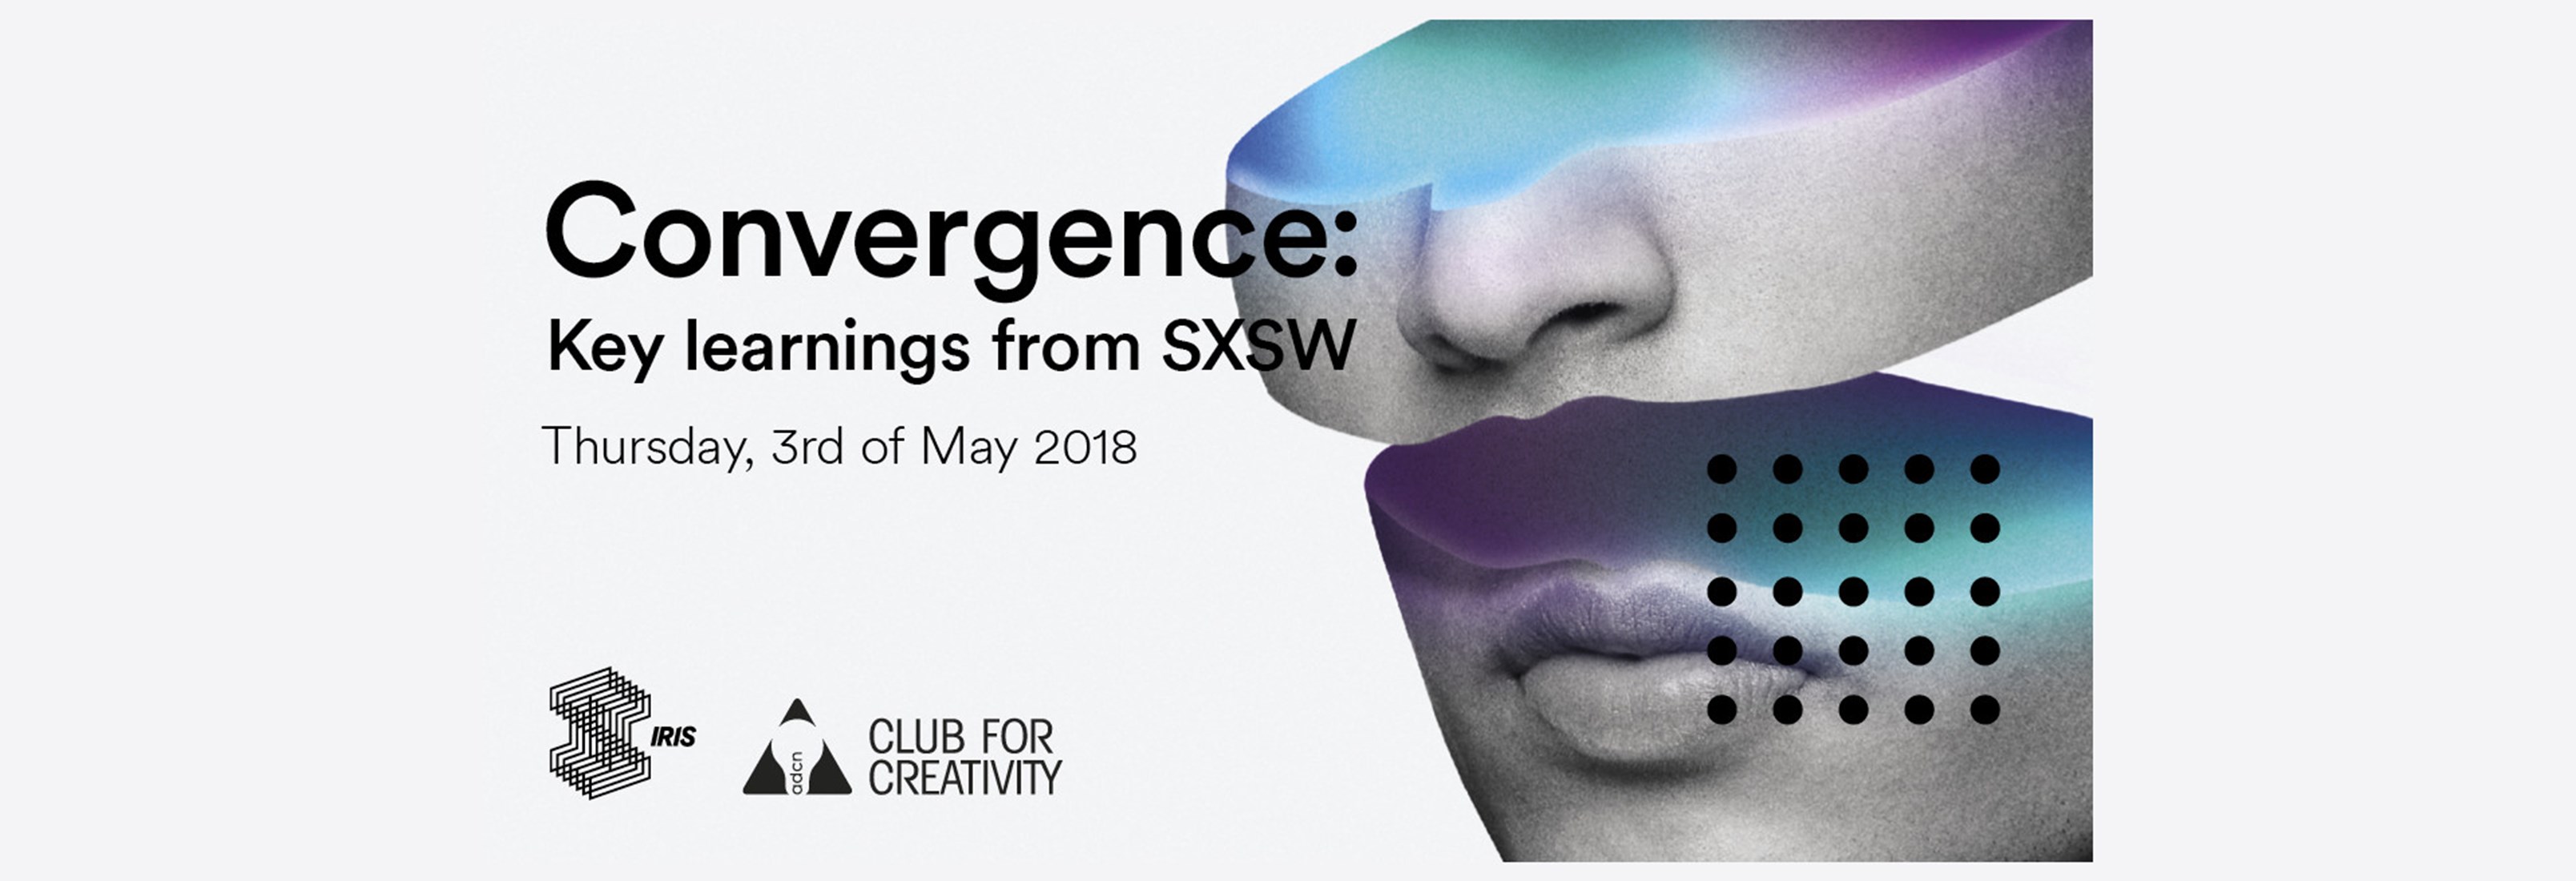 Iris and ADCN present key learnings from SXSW